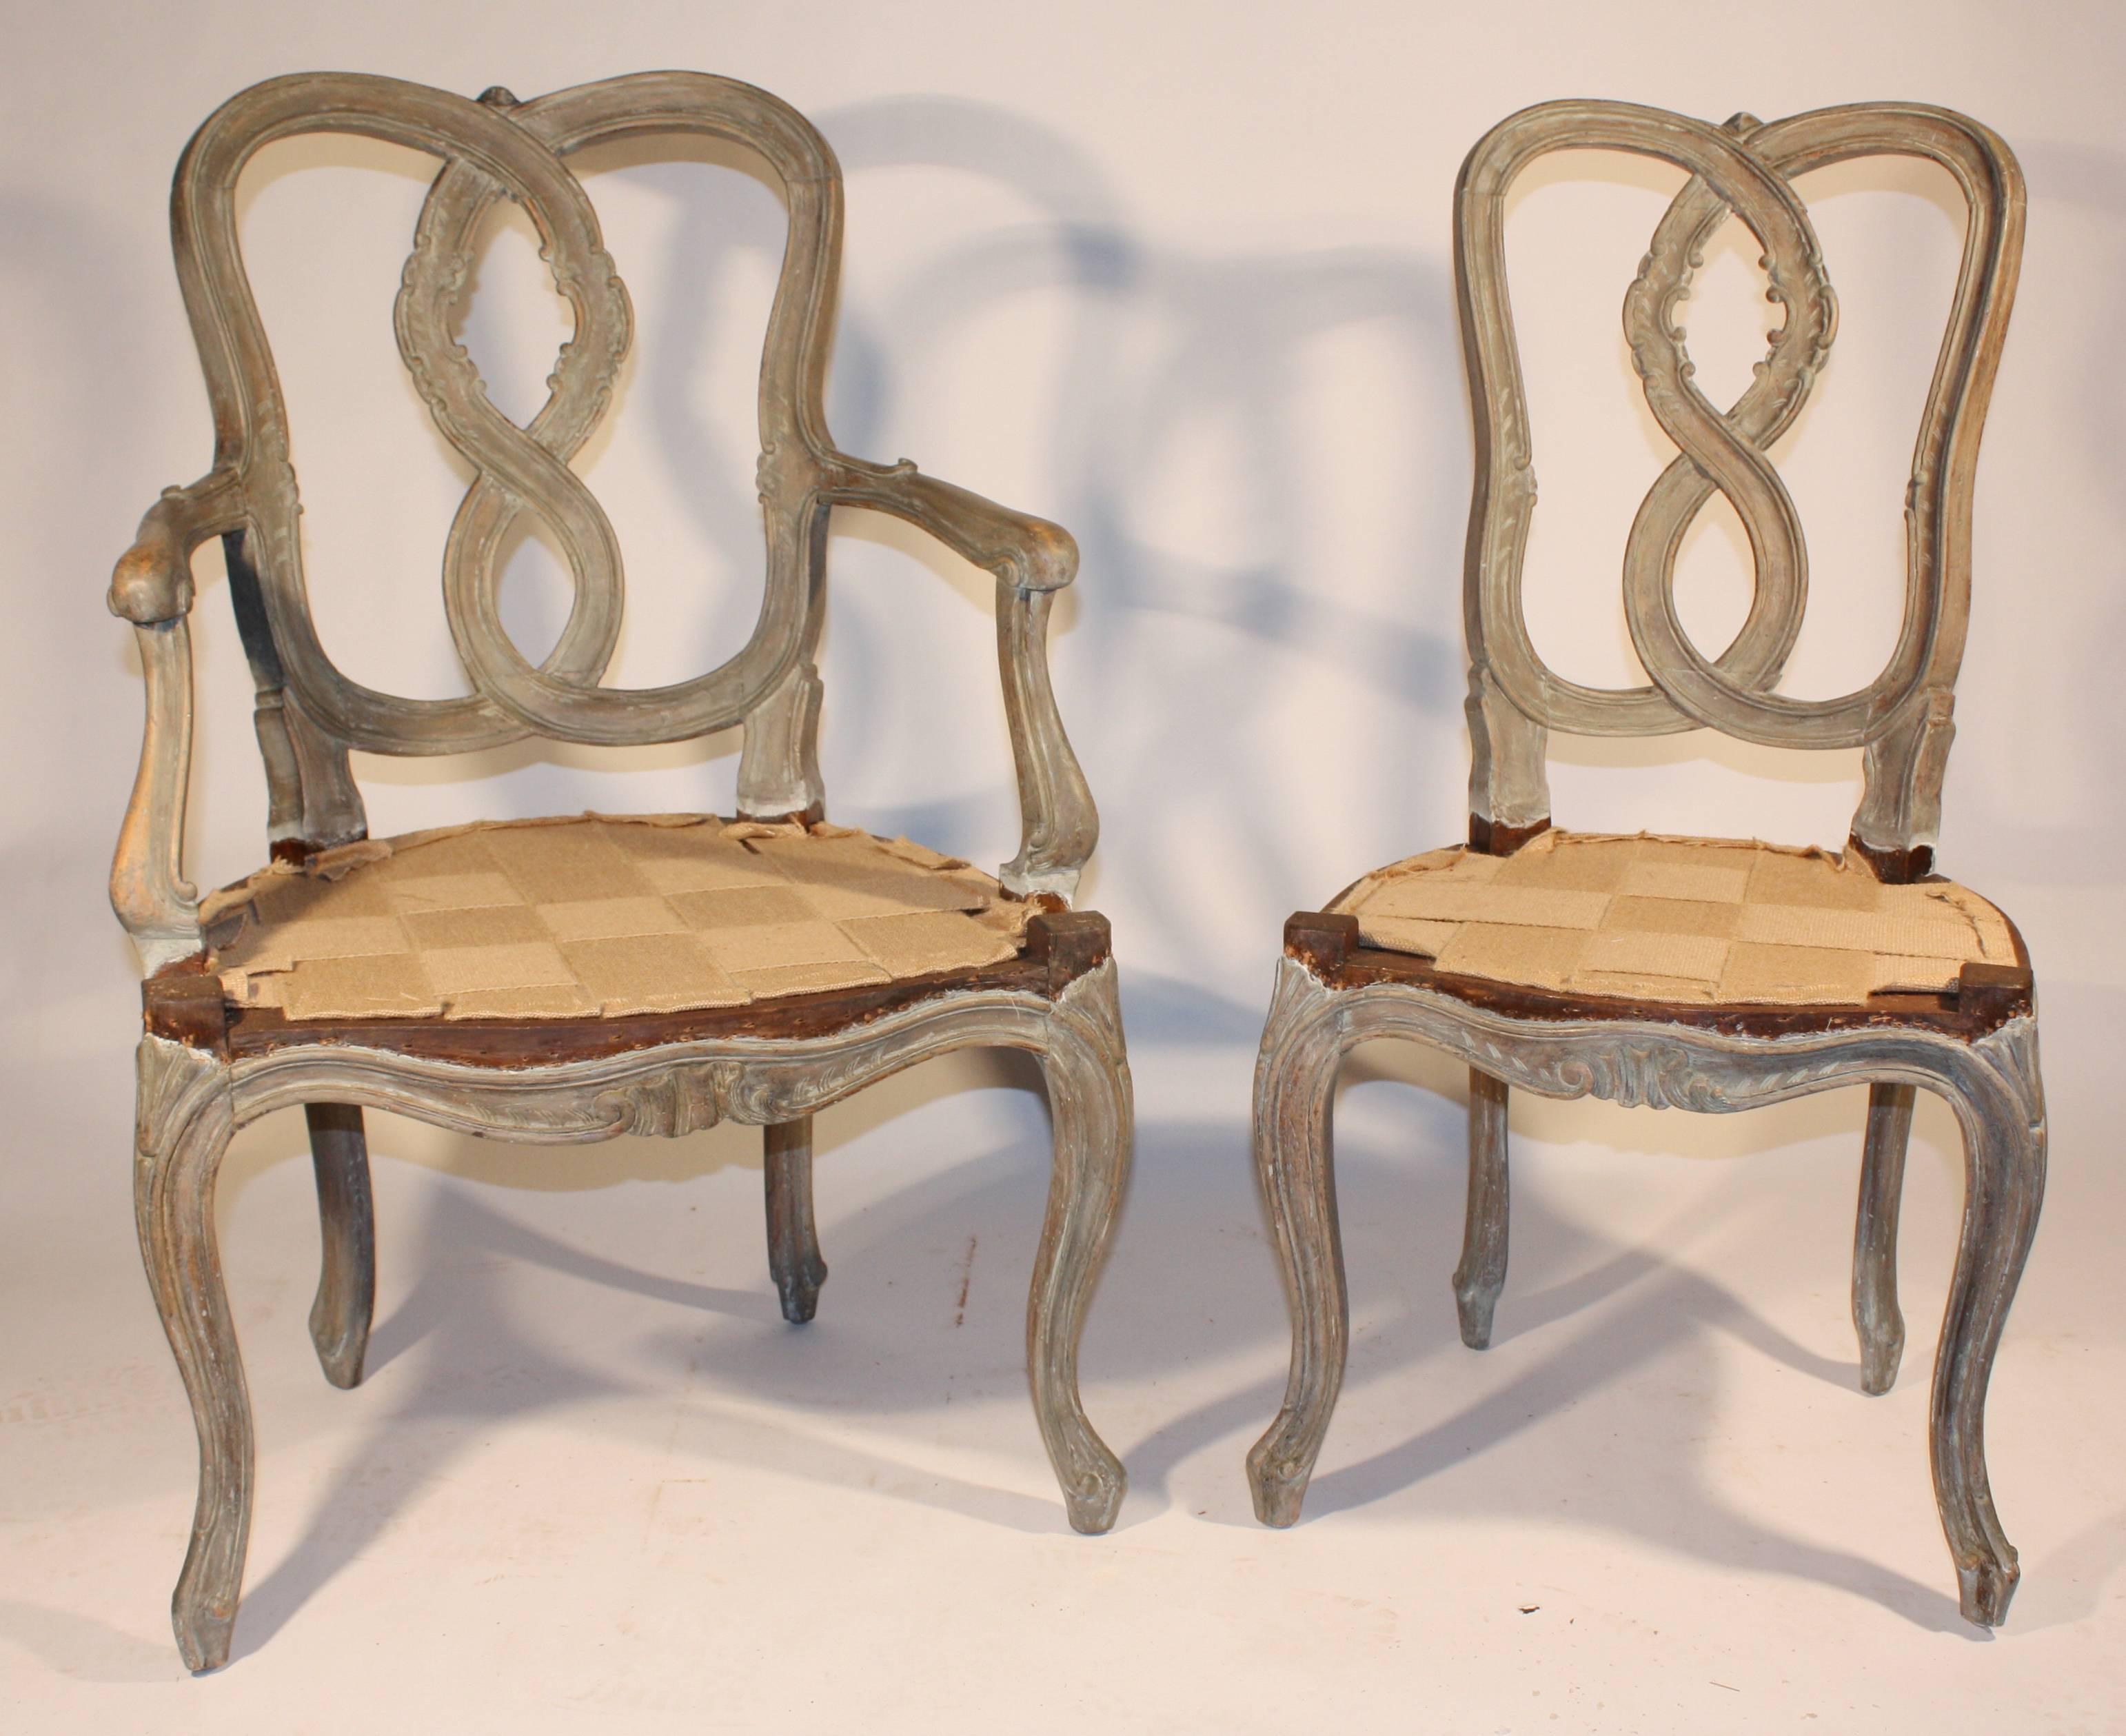 A charming set of six (two arm, four side) late 19th century, Italian dining chairs in the Venetian manner, partially stripped with a distressed verdigris-green painted finish. Ready for upholstery with new webbing and recently re-glued. Nicely